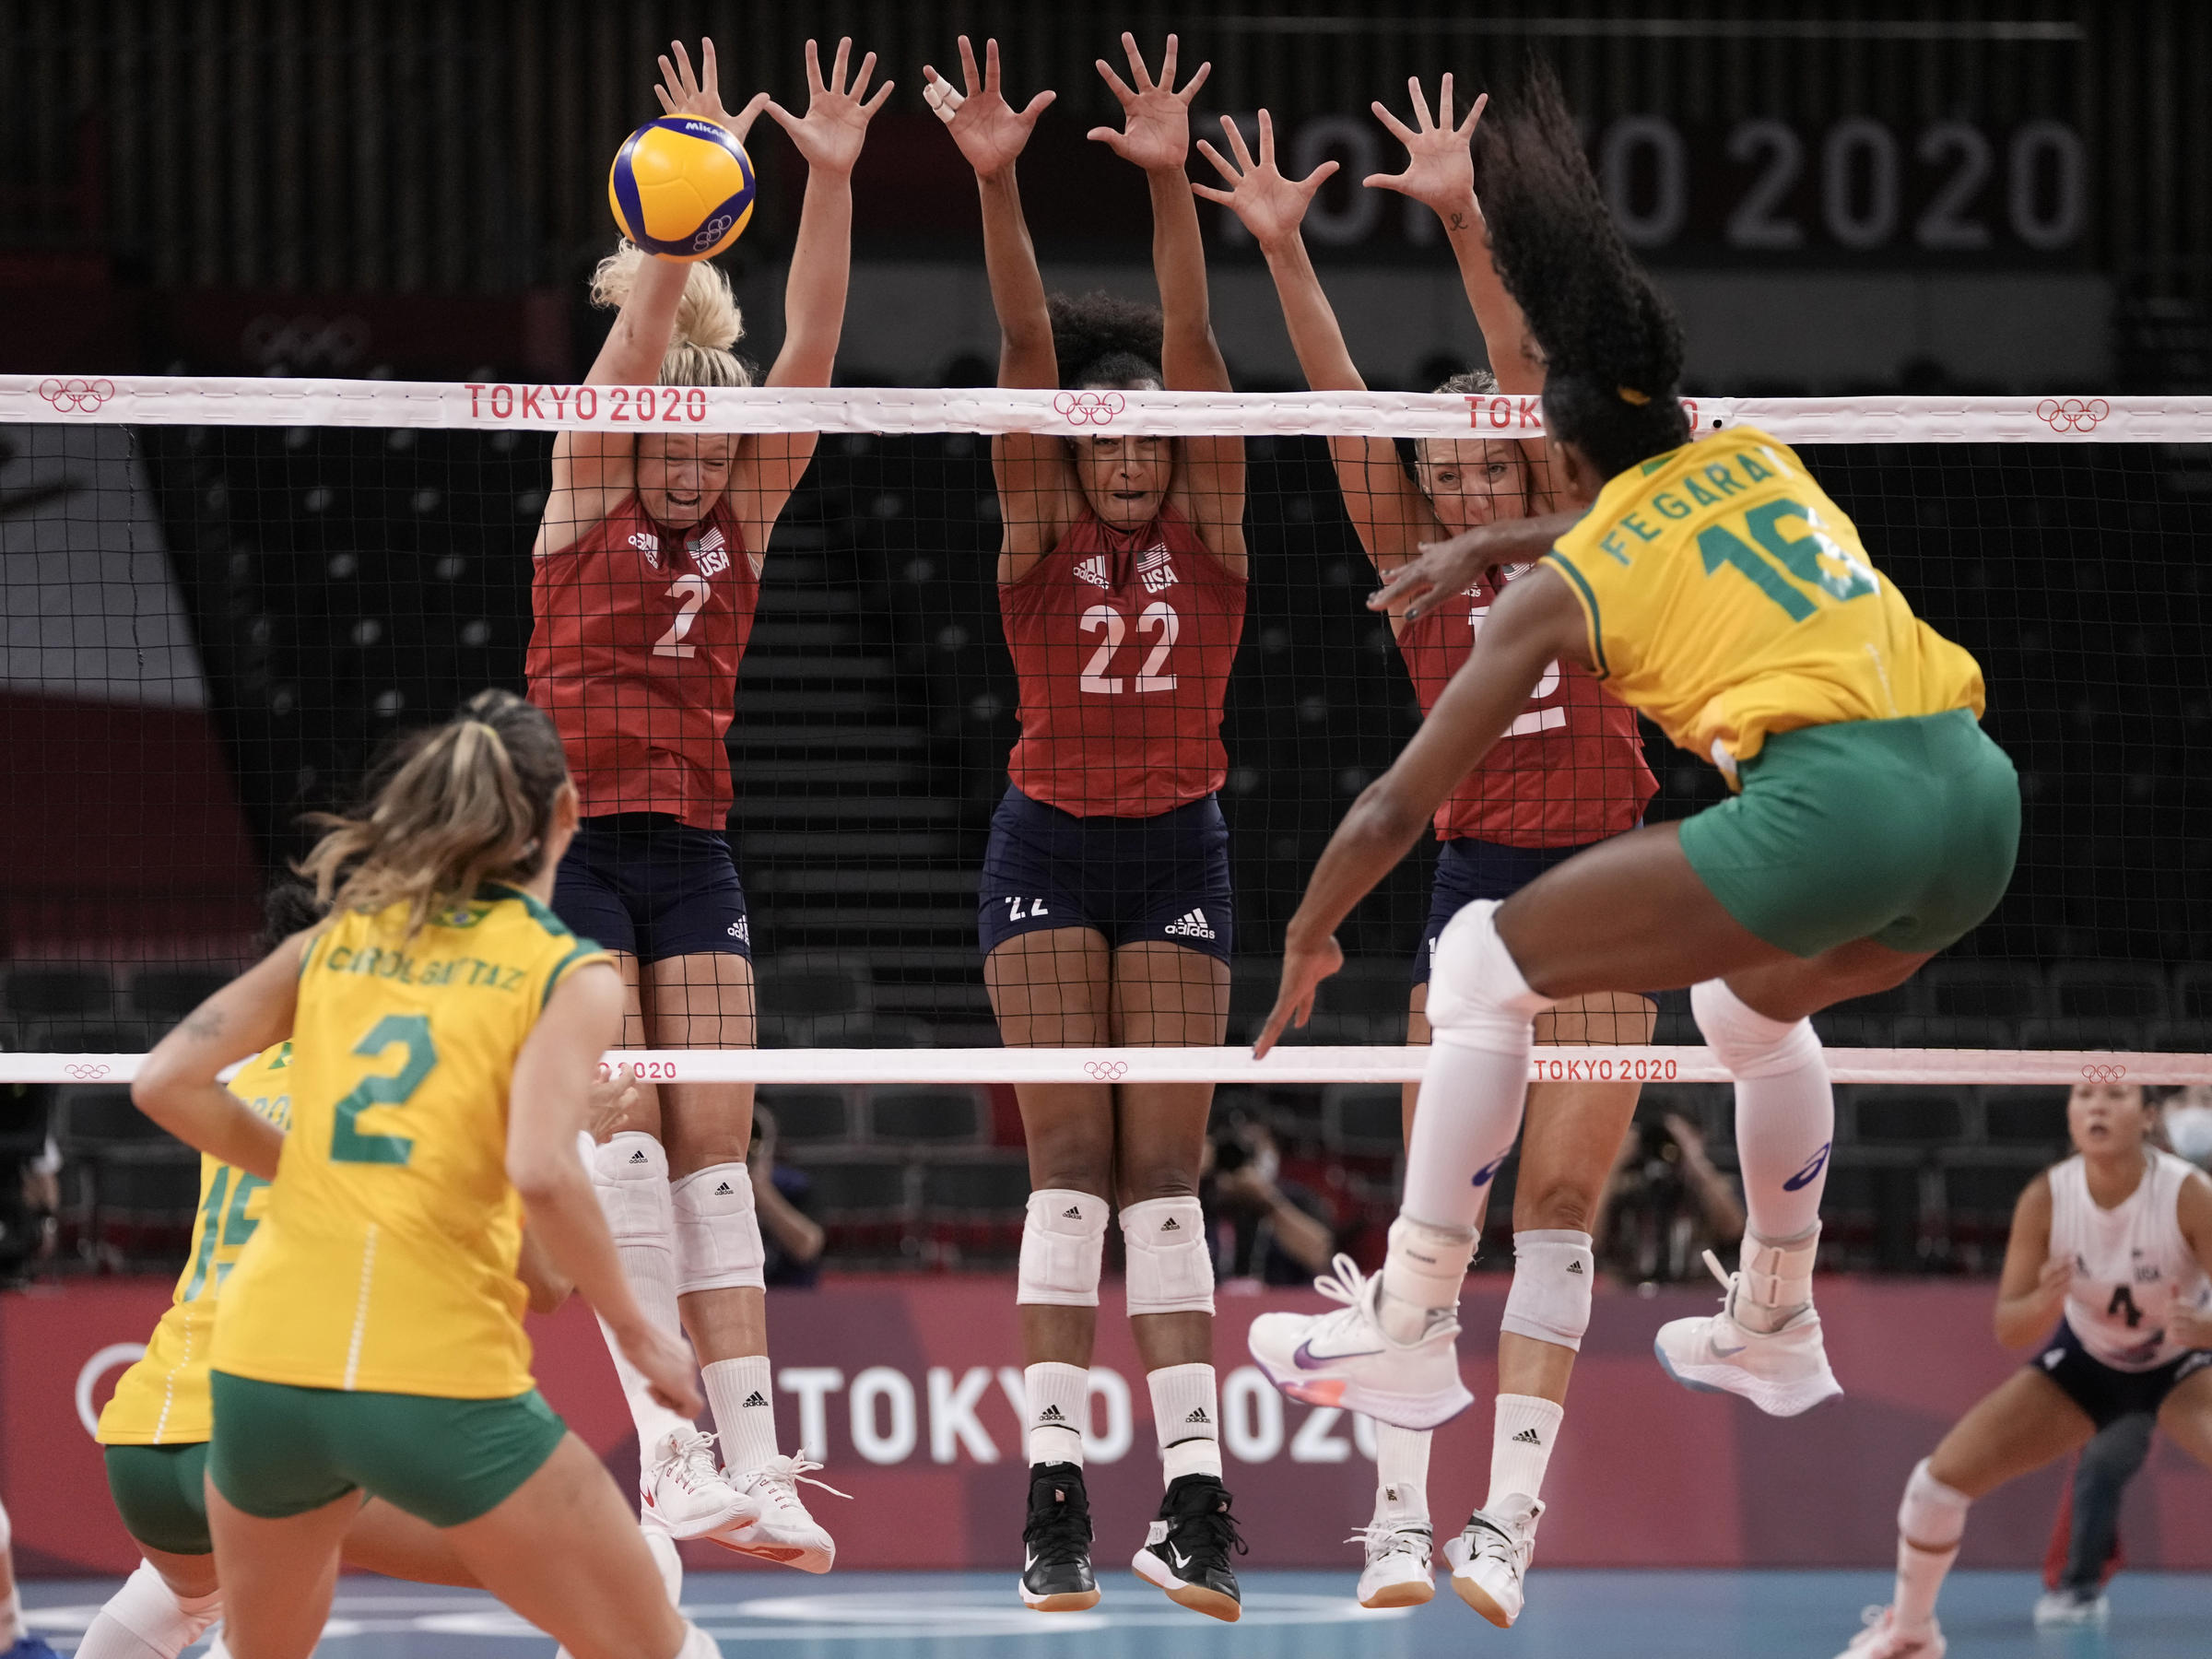 U.S. Women's Volleyball Team Wins First Ever Olympic Gold Medal KNAU